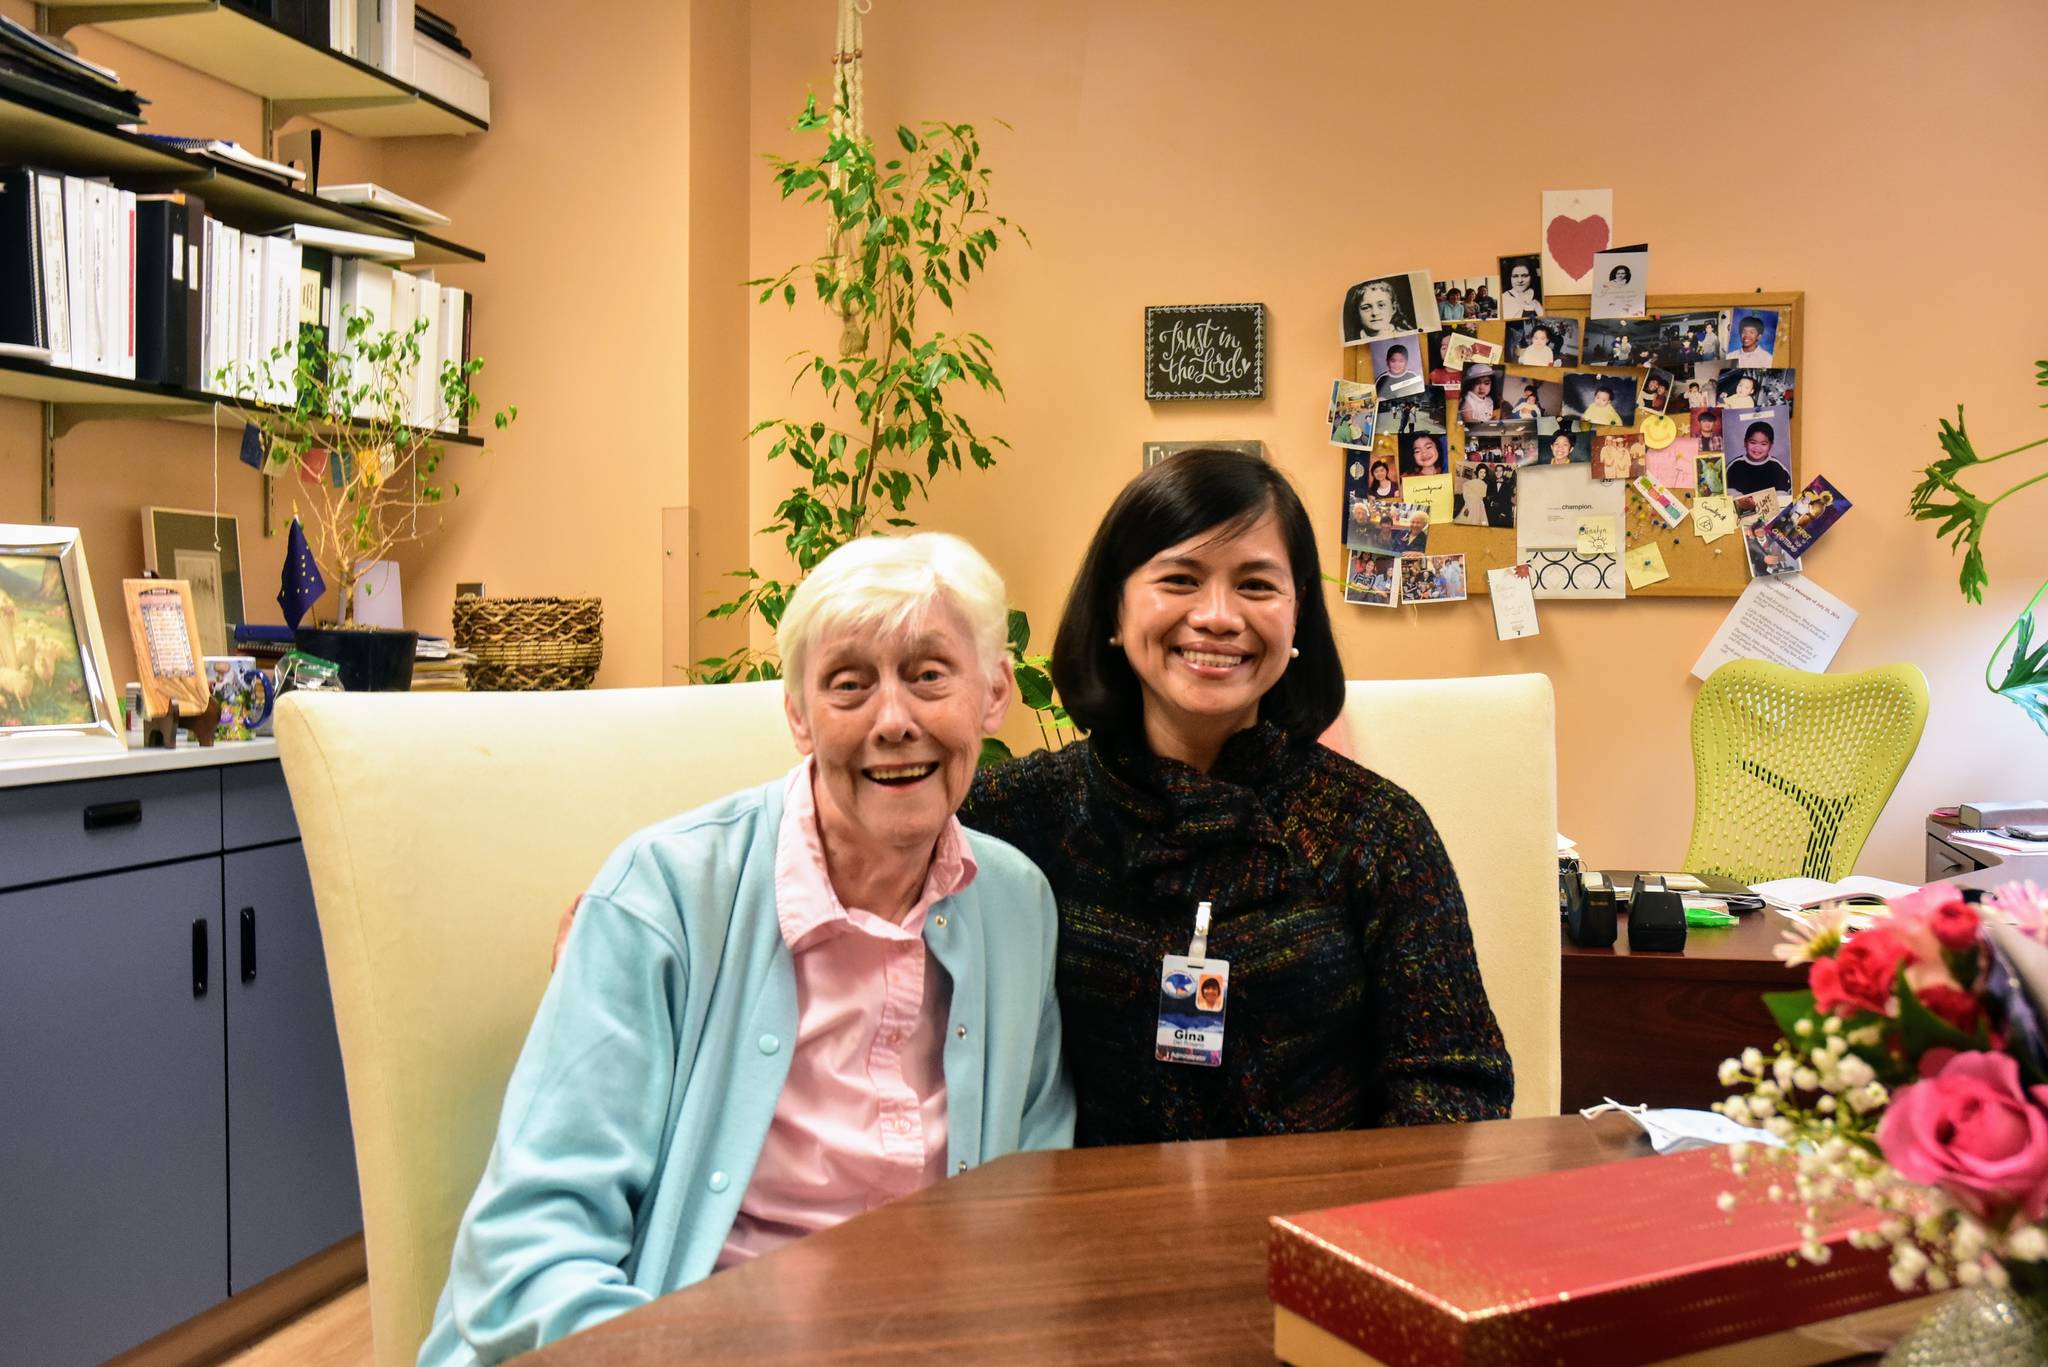 Juneau Pioneer Home resident Phyllis Woodman, left, sits with the home's administrator Gina Del Rosario, right, on Thursday, April 29, 2021. Del Rosario is retiring and friends and colleagues say she'll be hard to replace. (Peter Segall / Juneau Empire)